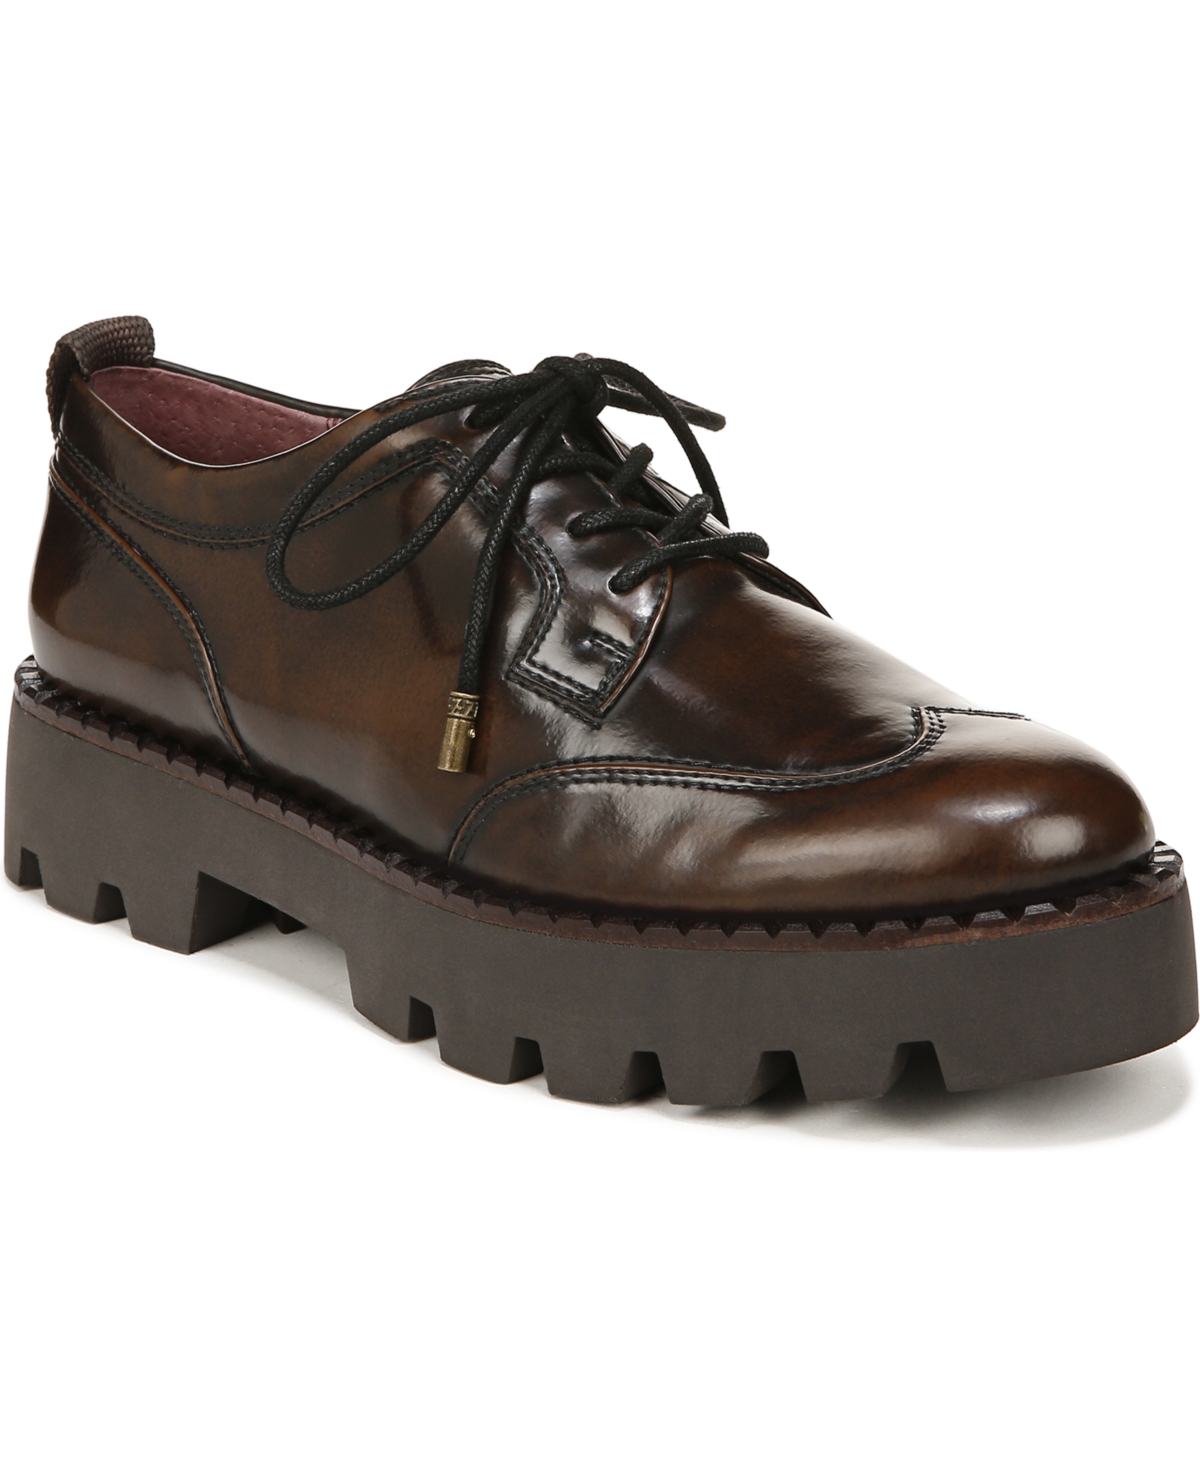 Balin-oxford Lug Sole Oxfords - Brown Faux Leather